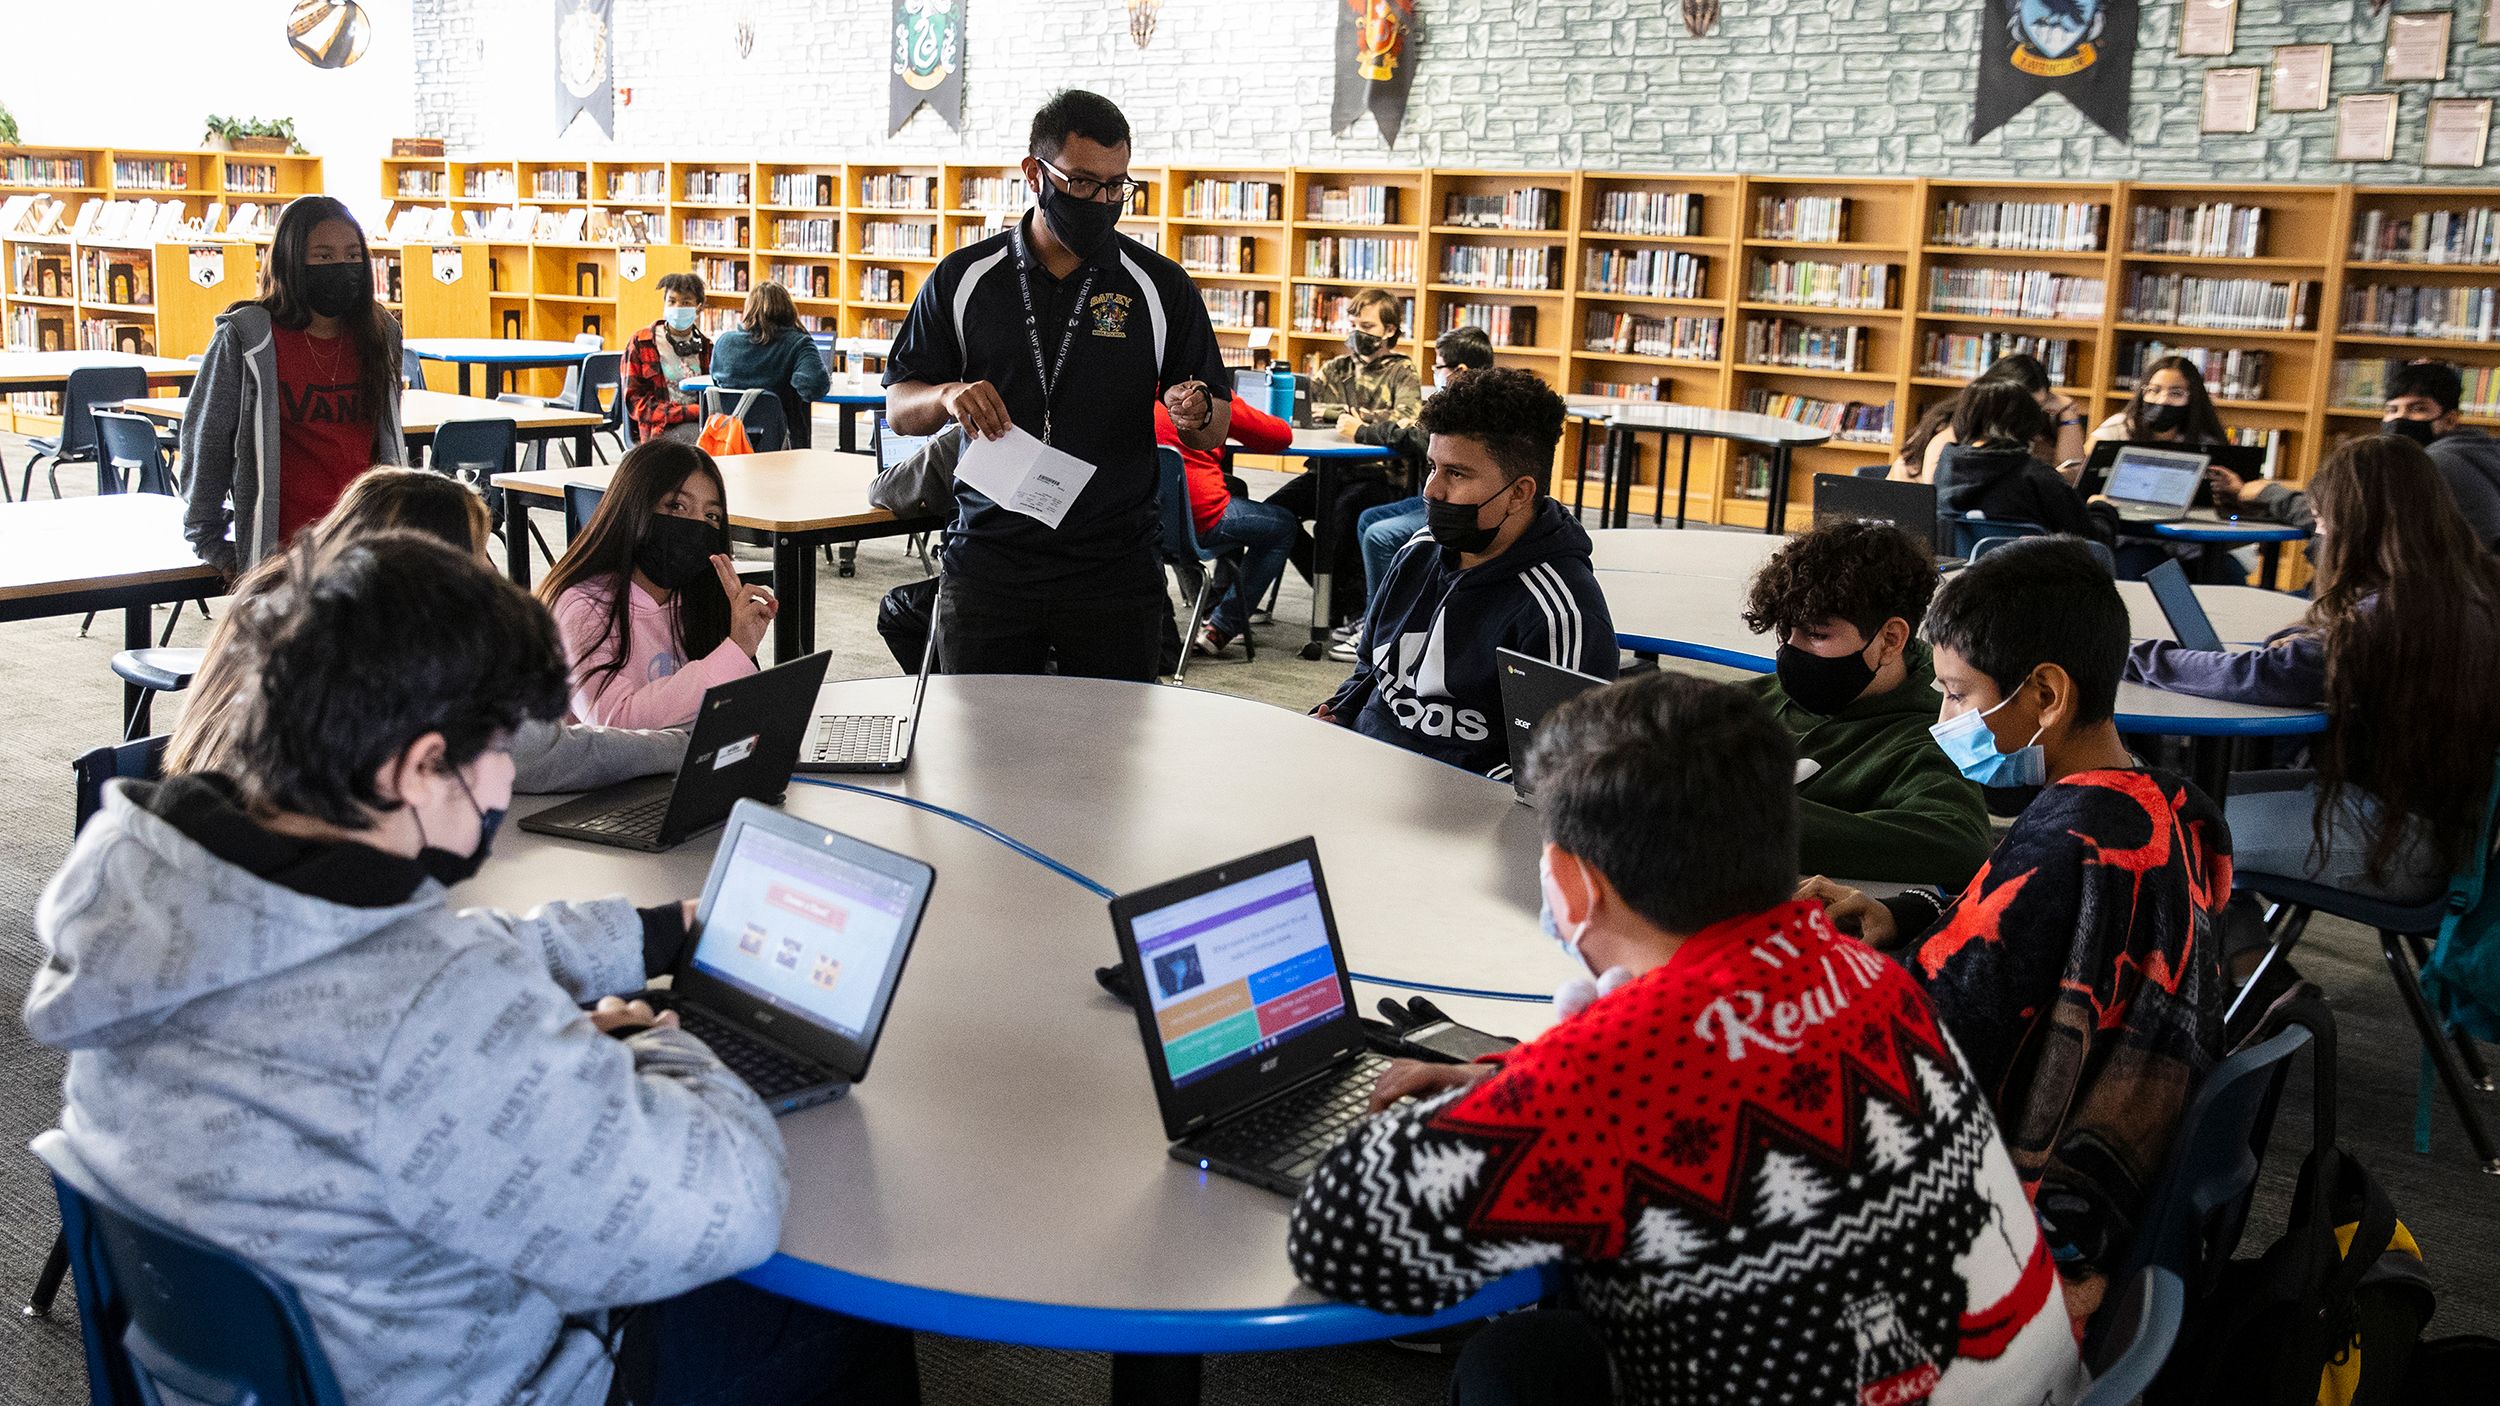 A substitute teacher at a Las Vegas middle school works with three classes of students at the school library in December 2021.